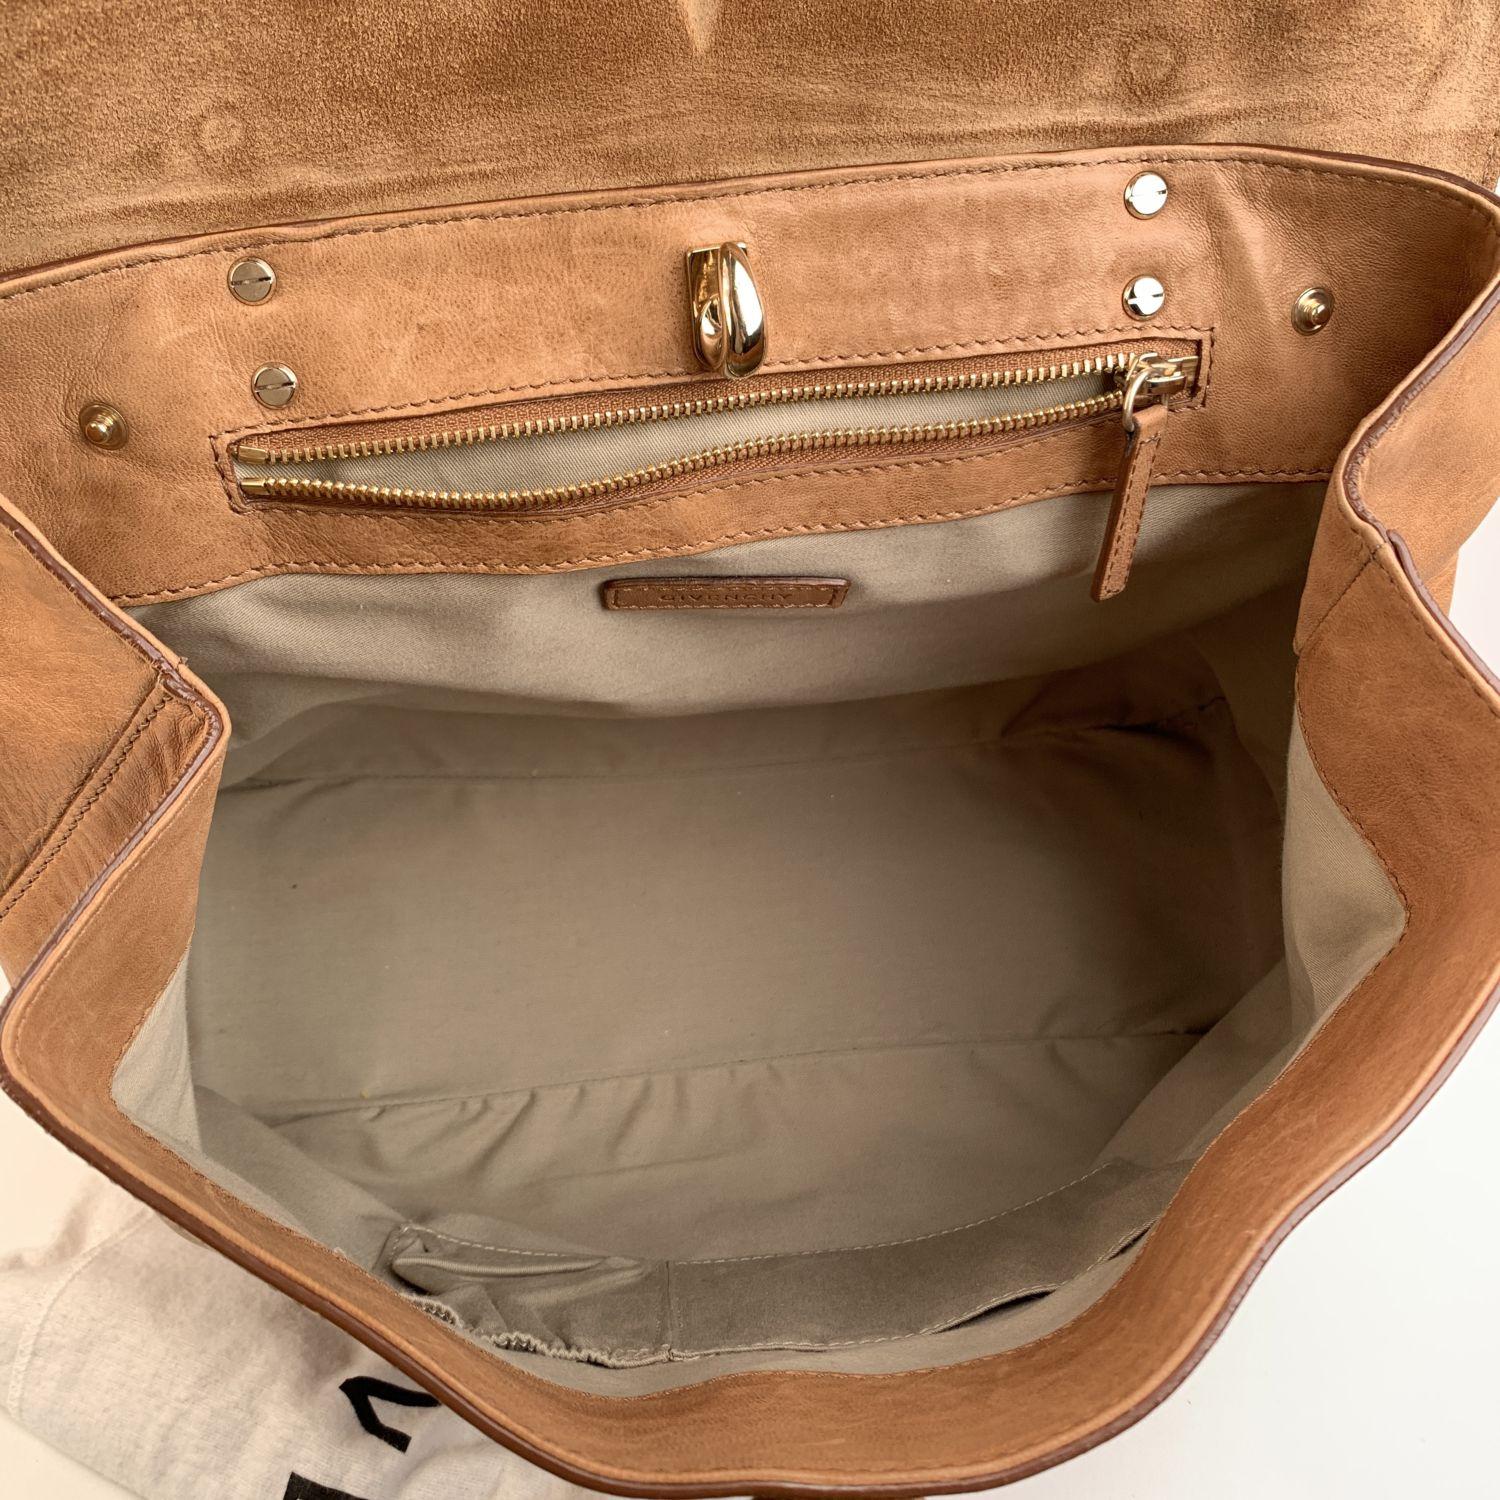 Women's Givenchy Tan Leather Large New Line Flap Tote Shoulder Bag